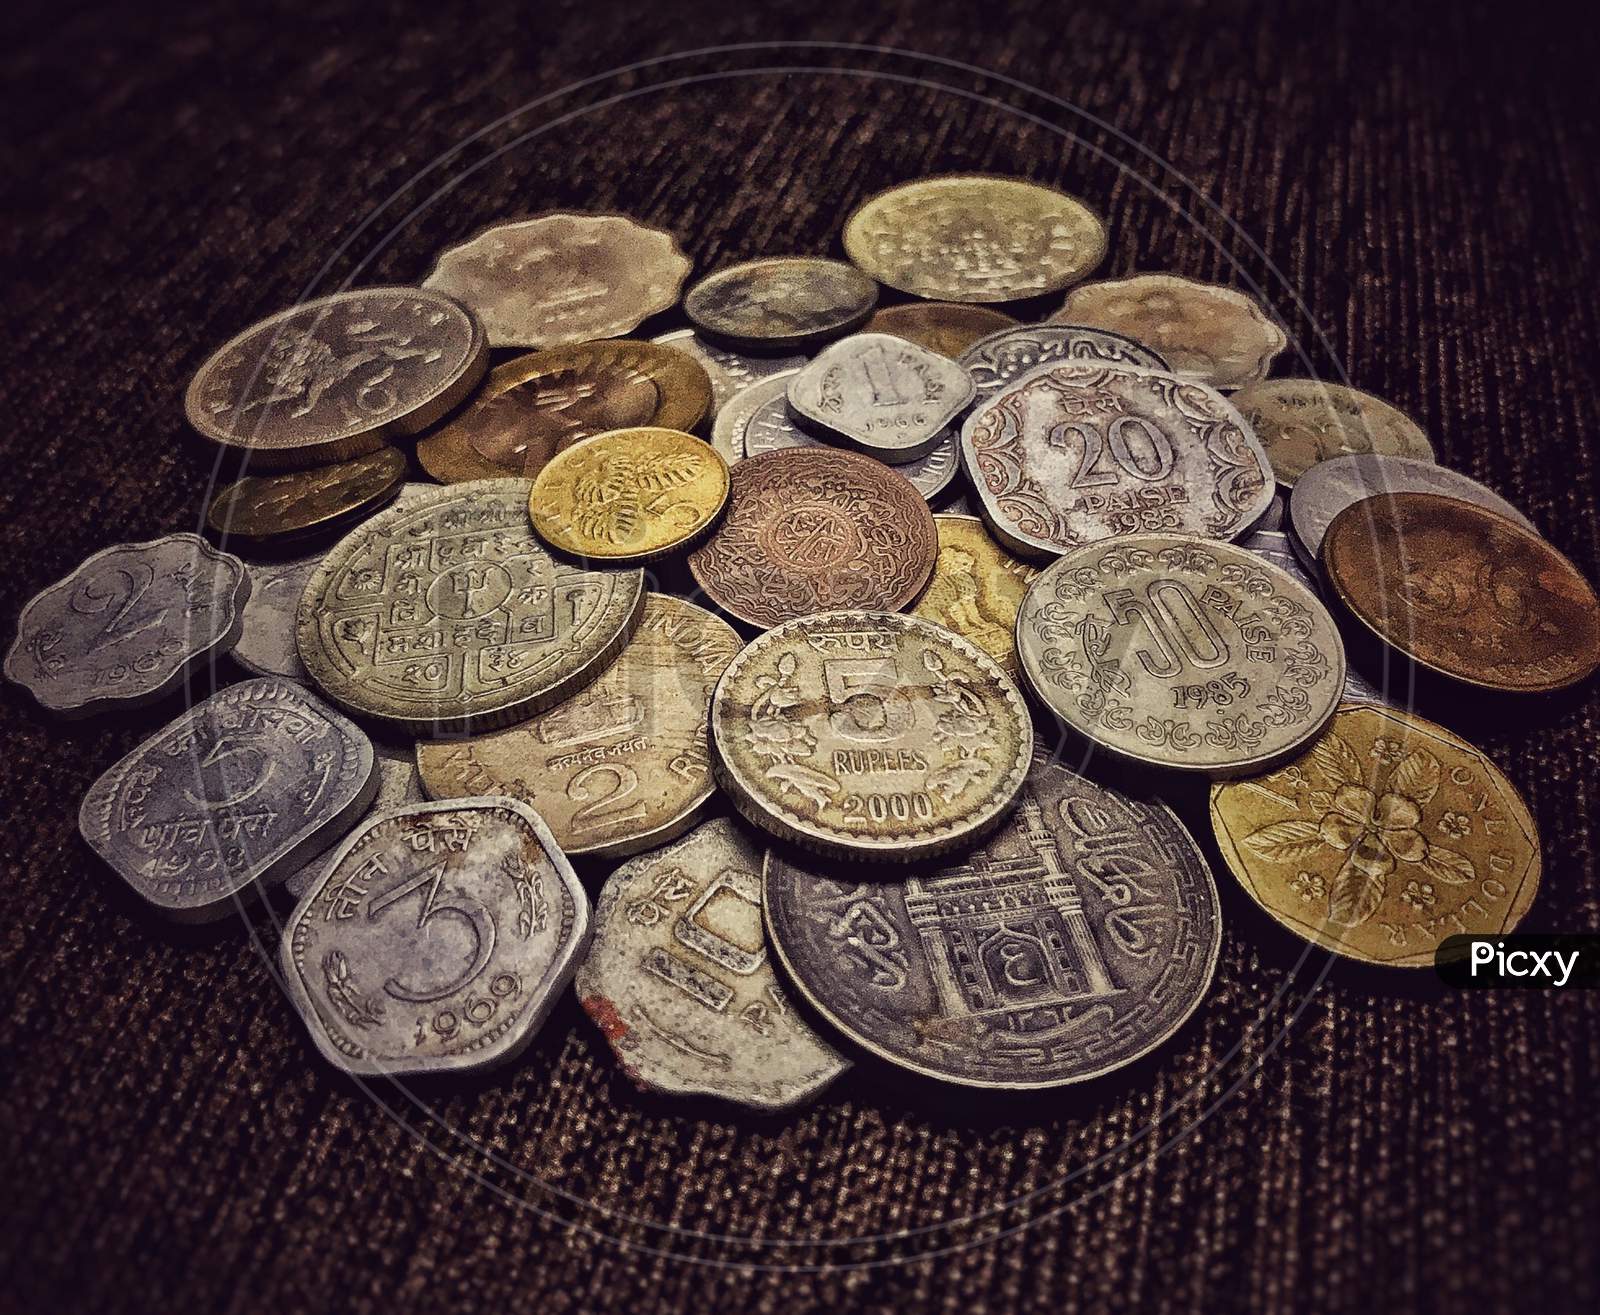 Dad’s coin collection